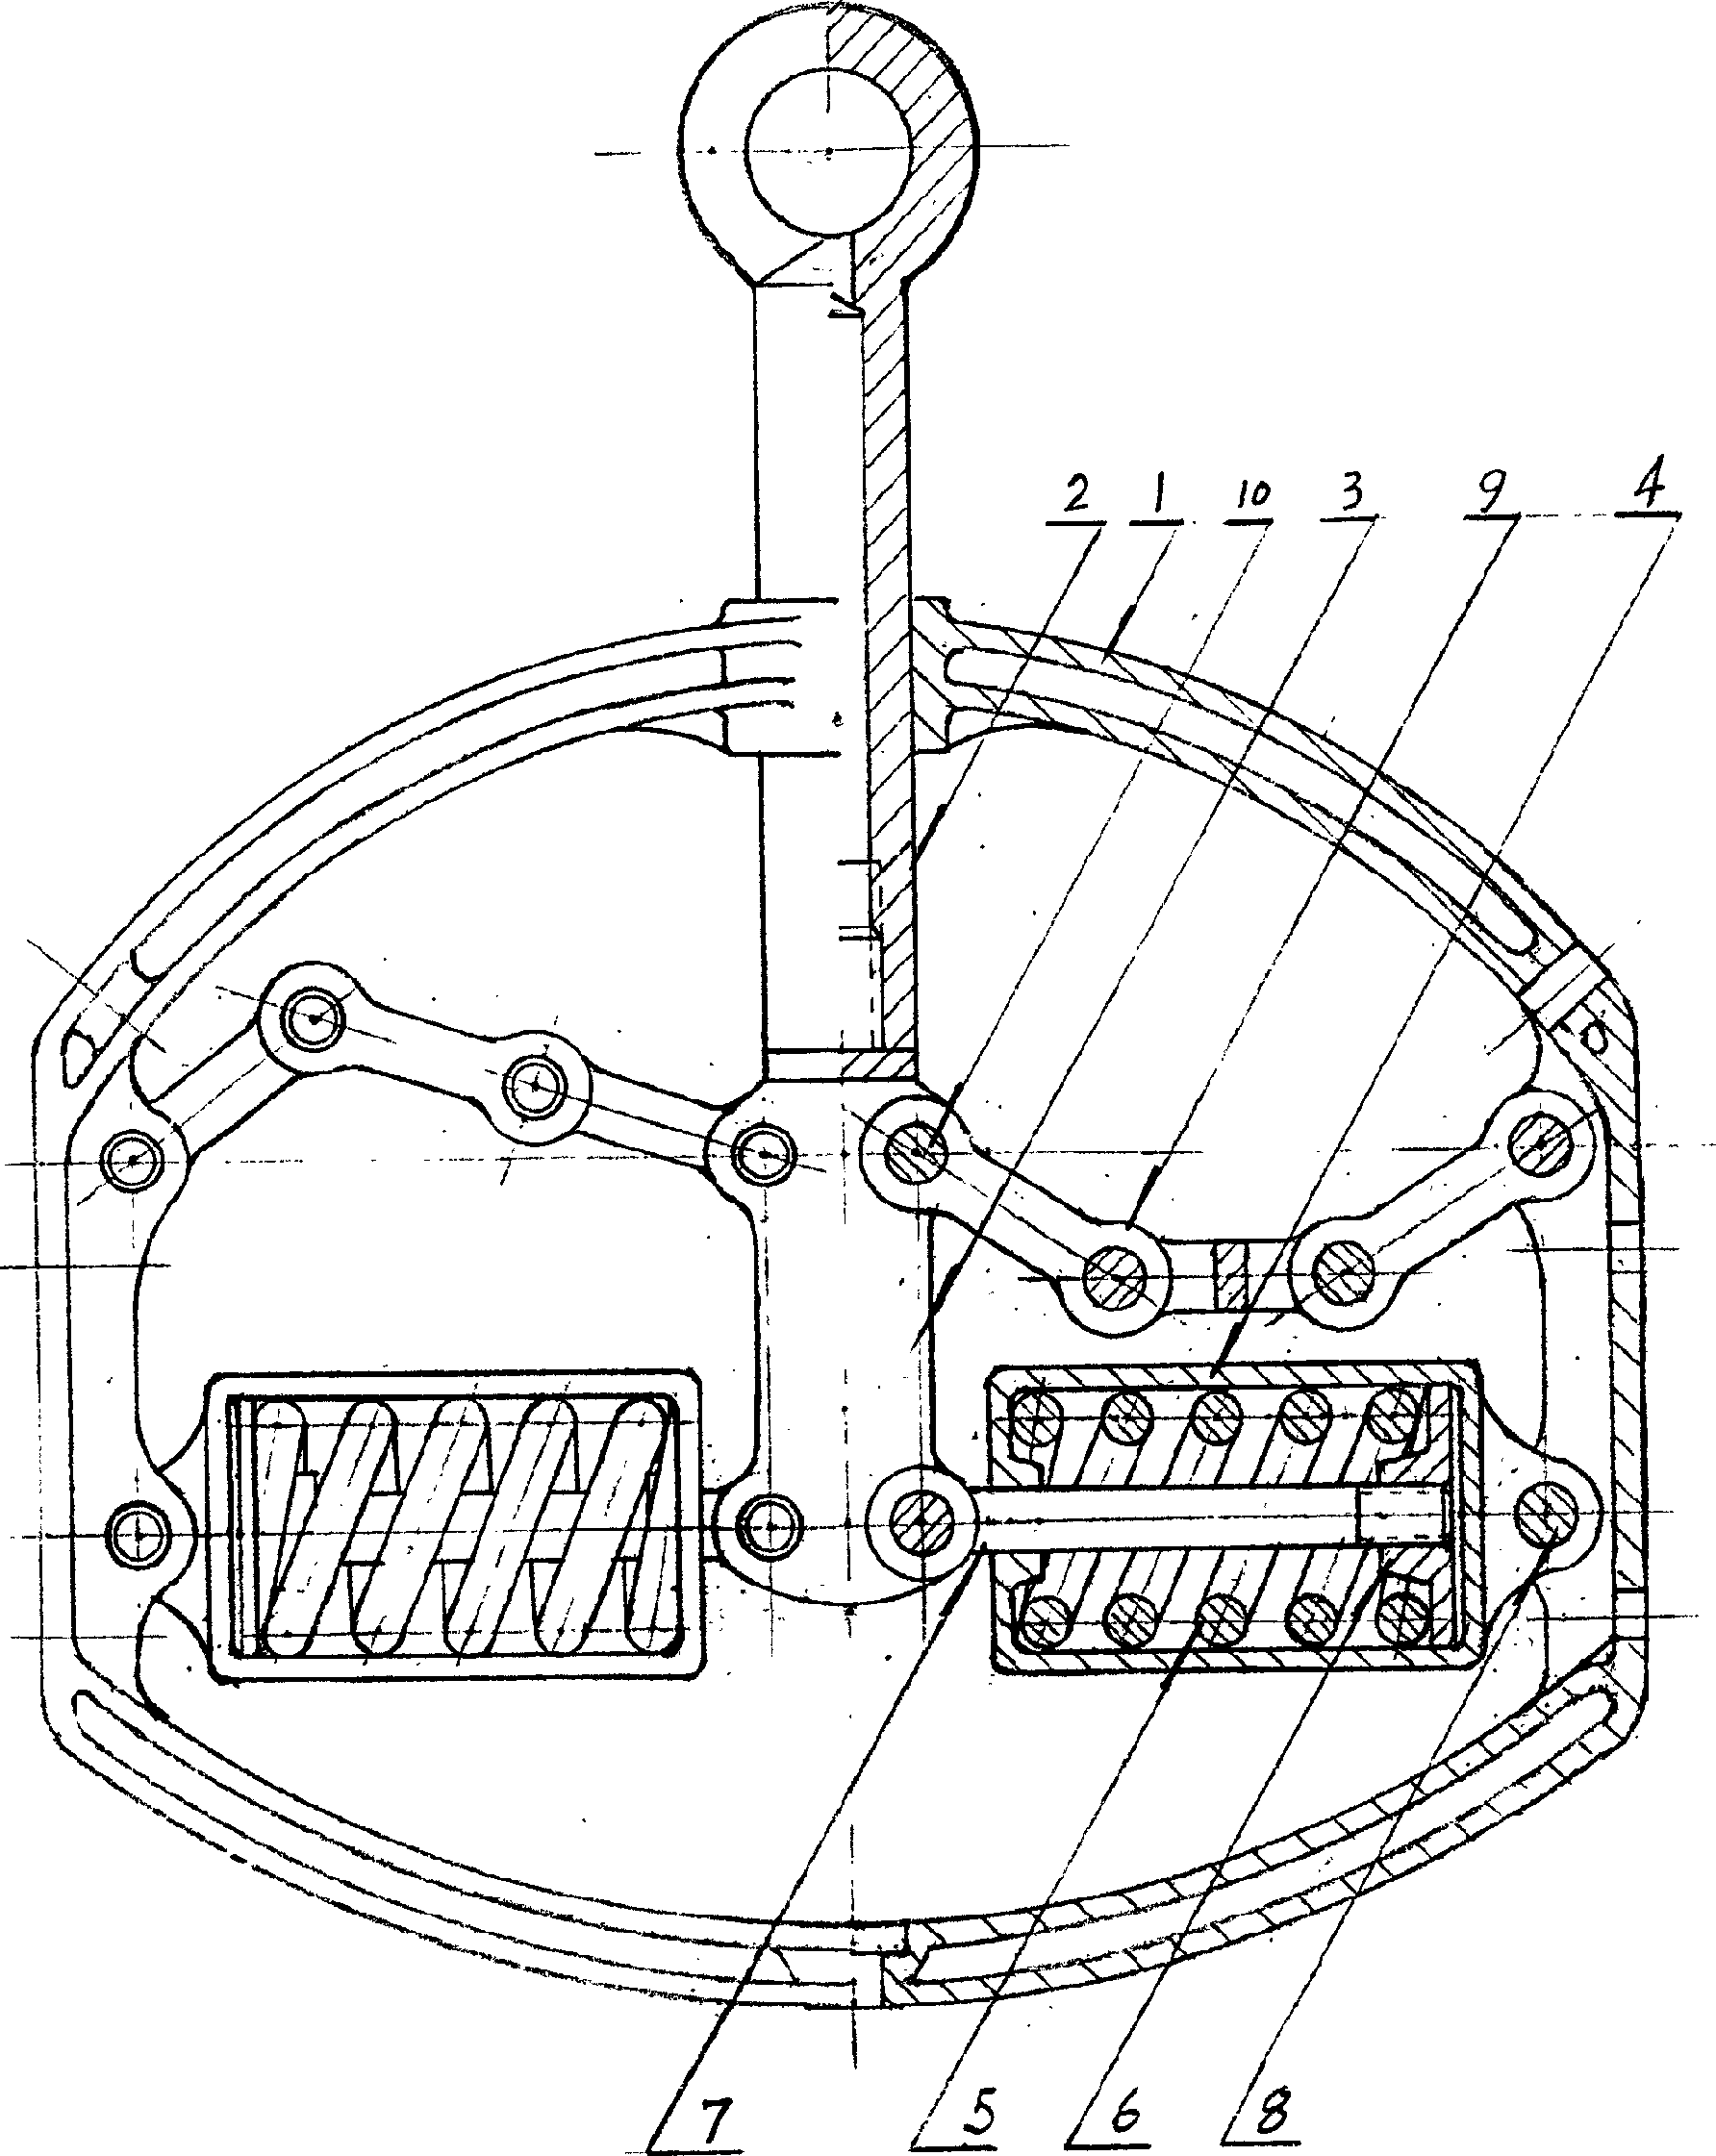 Elastic full effect traction coupling device